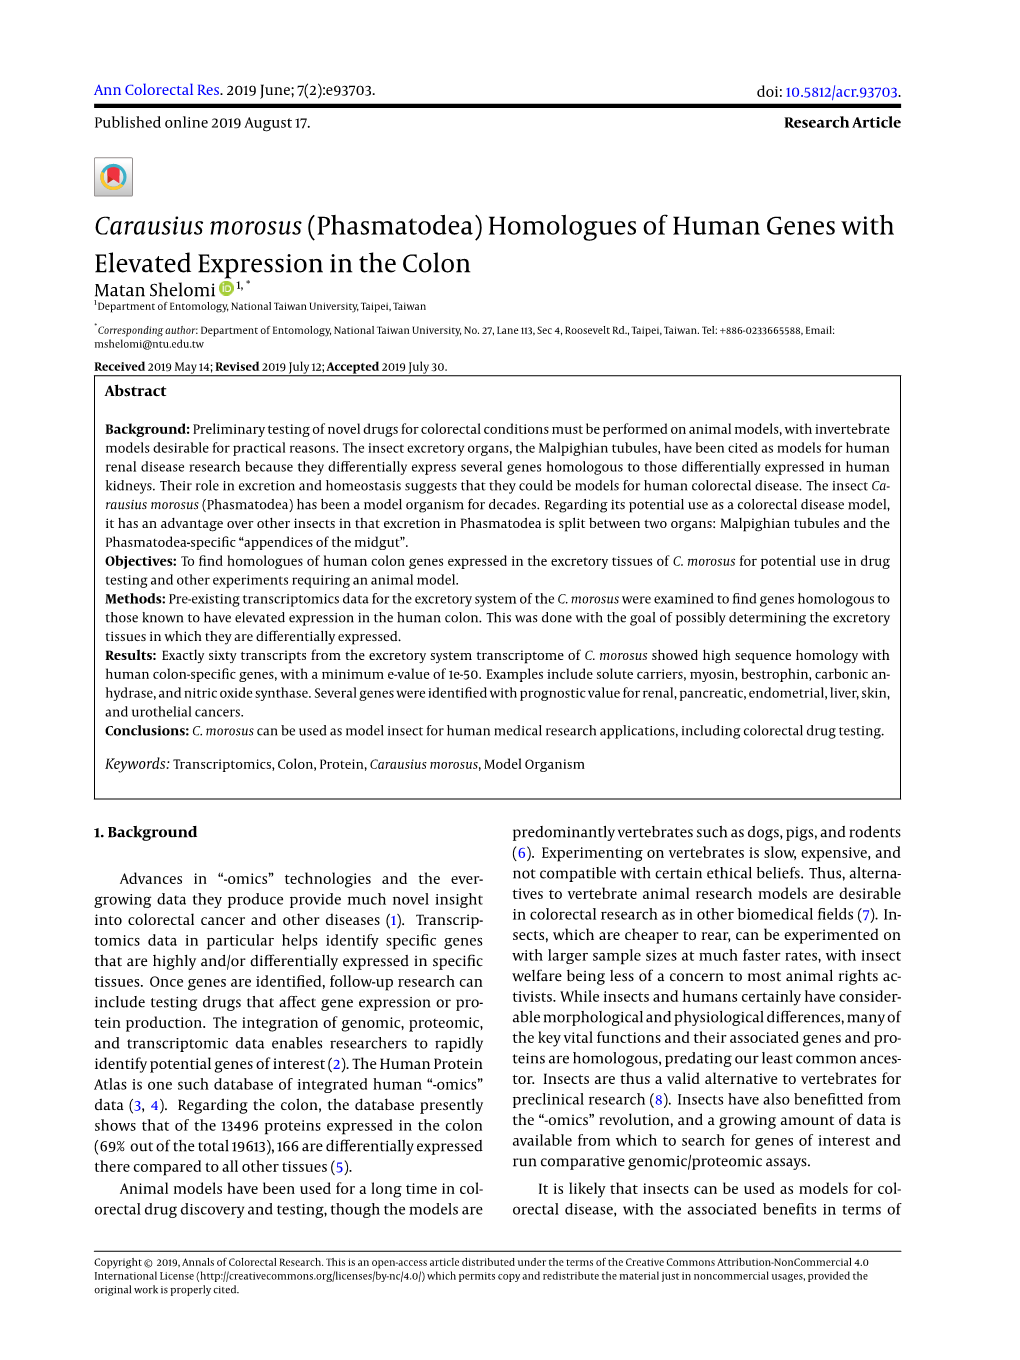 Carausius Morosus (Phasmatodea) Homologues of Human Genes with Elevated Expression in the Colon